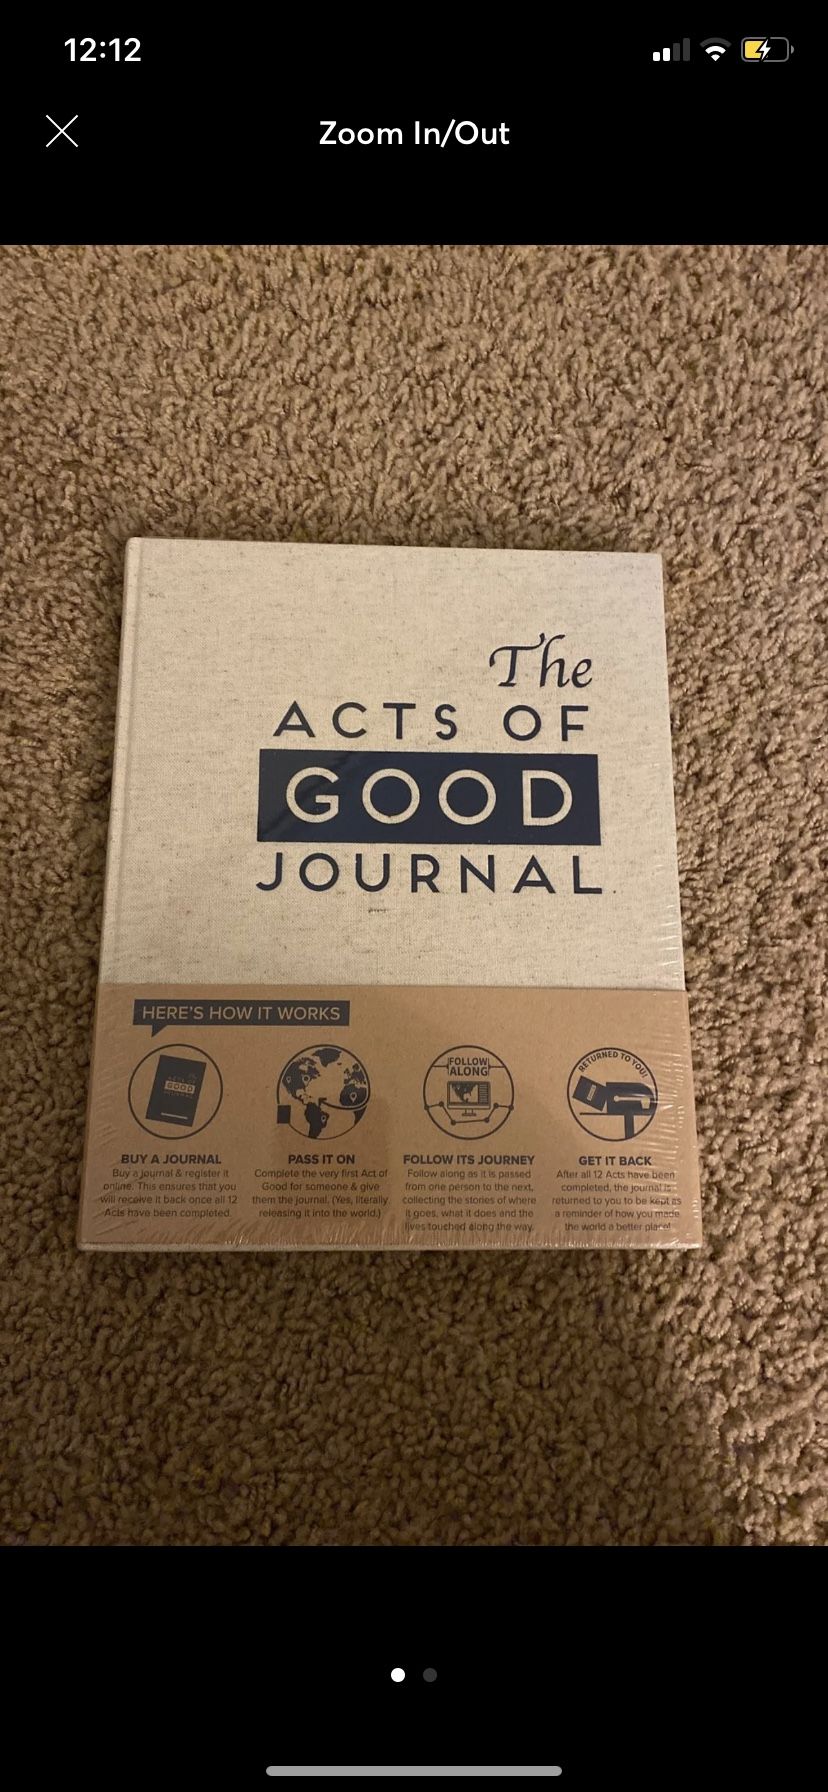 The acts of good journal